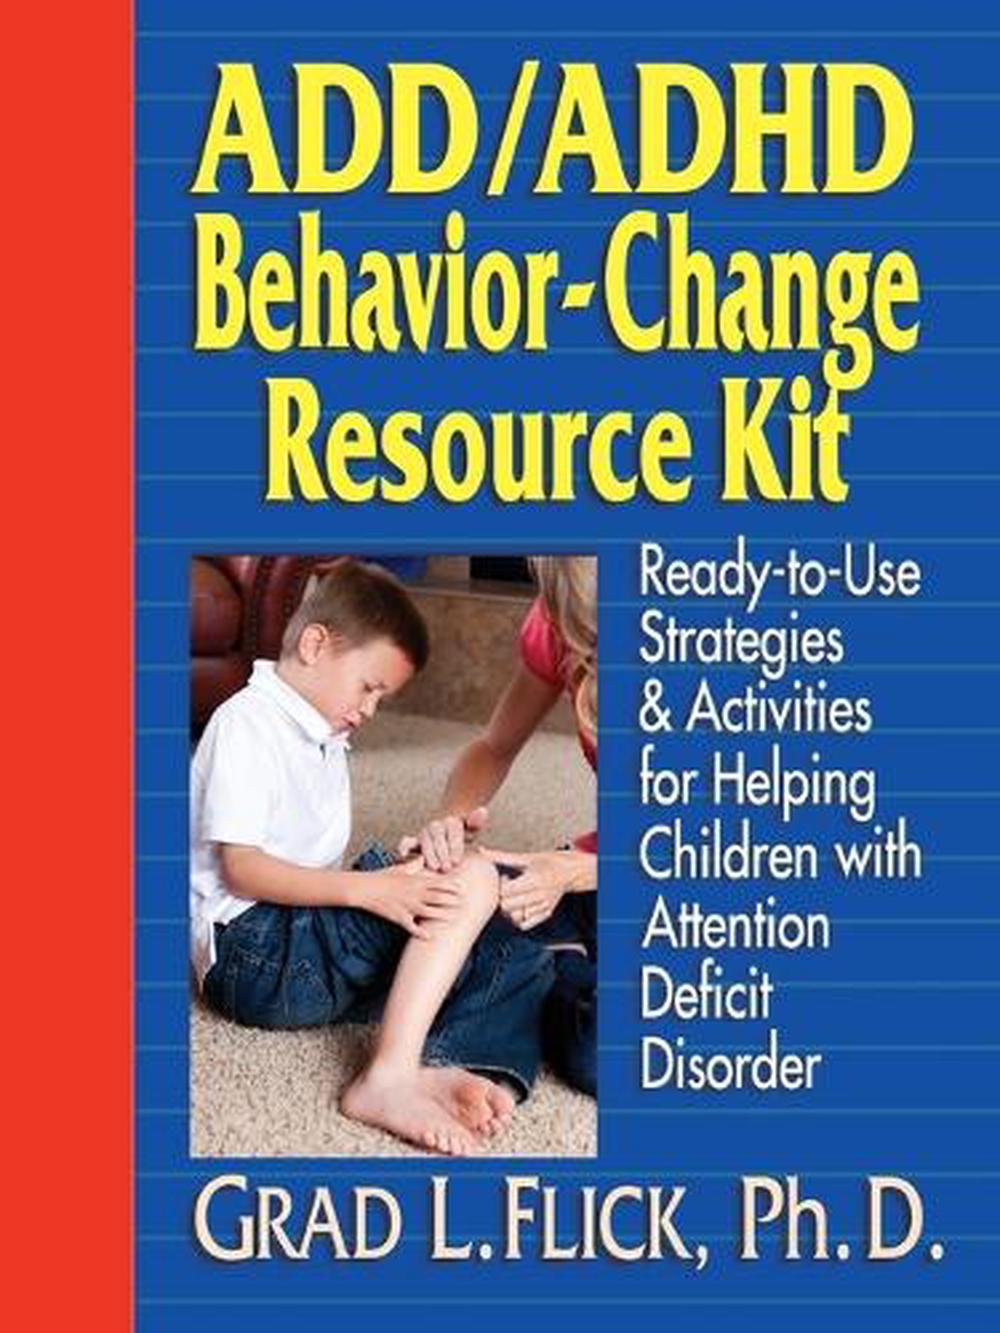 Add / ADHD Behavior-Change Resource Kit: Ready-To-Use Strategies and ...